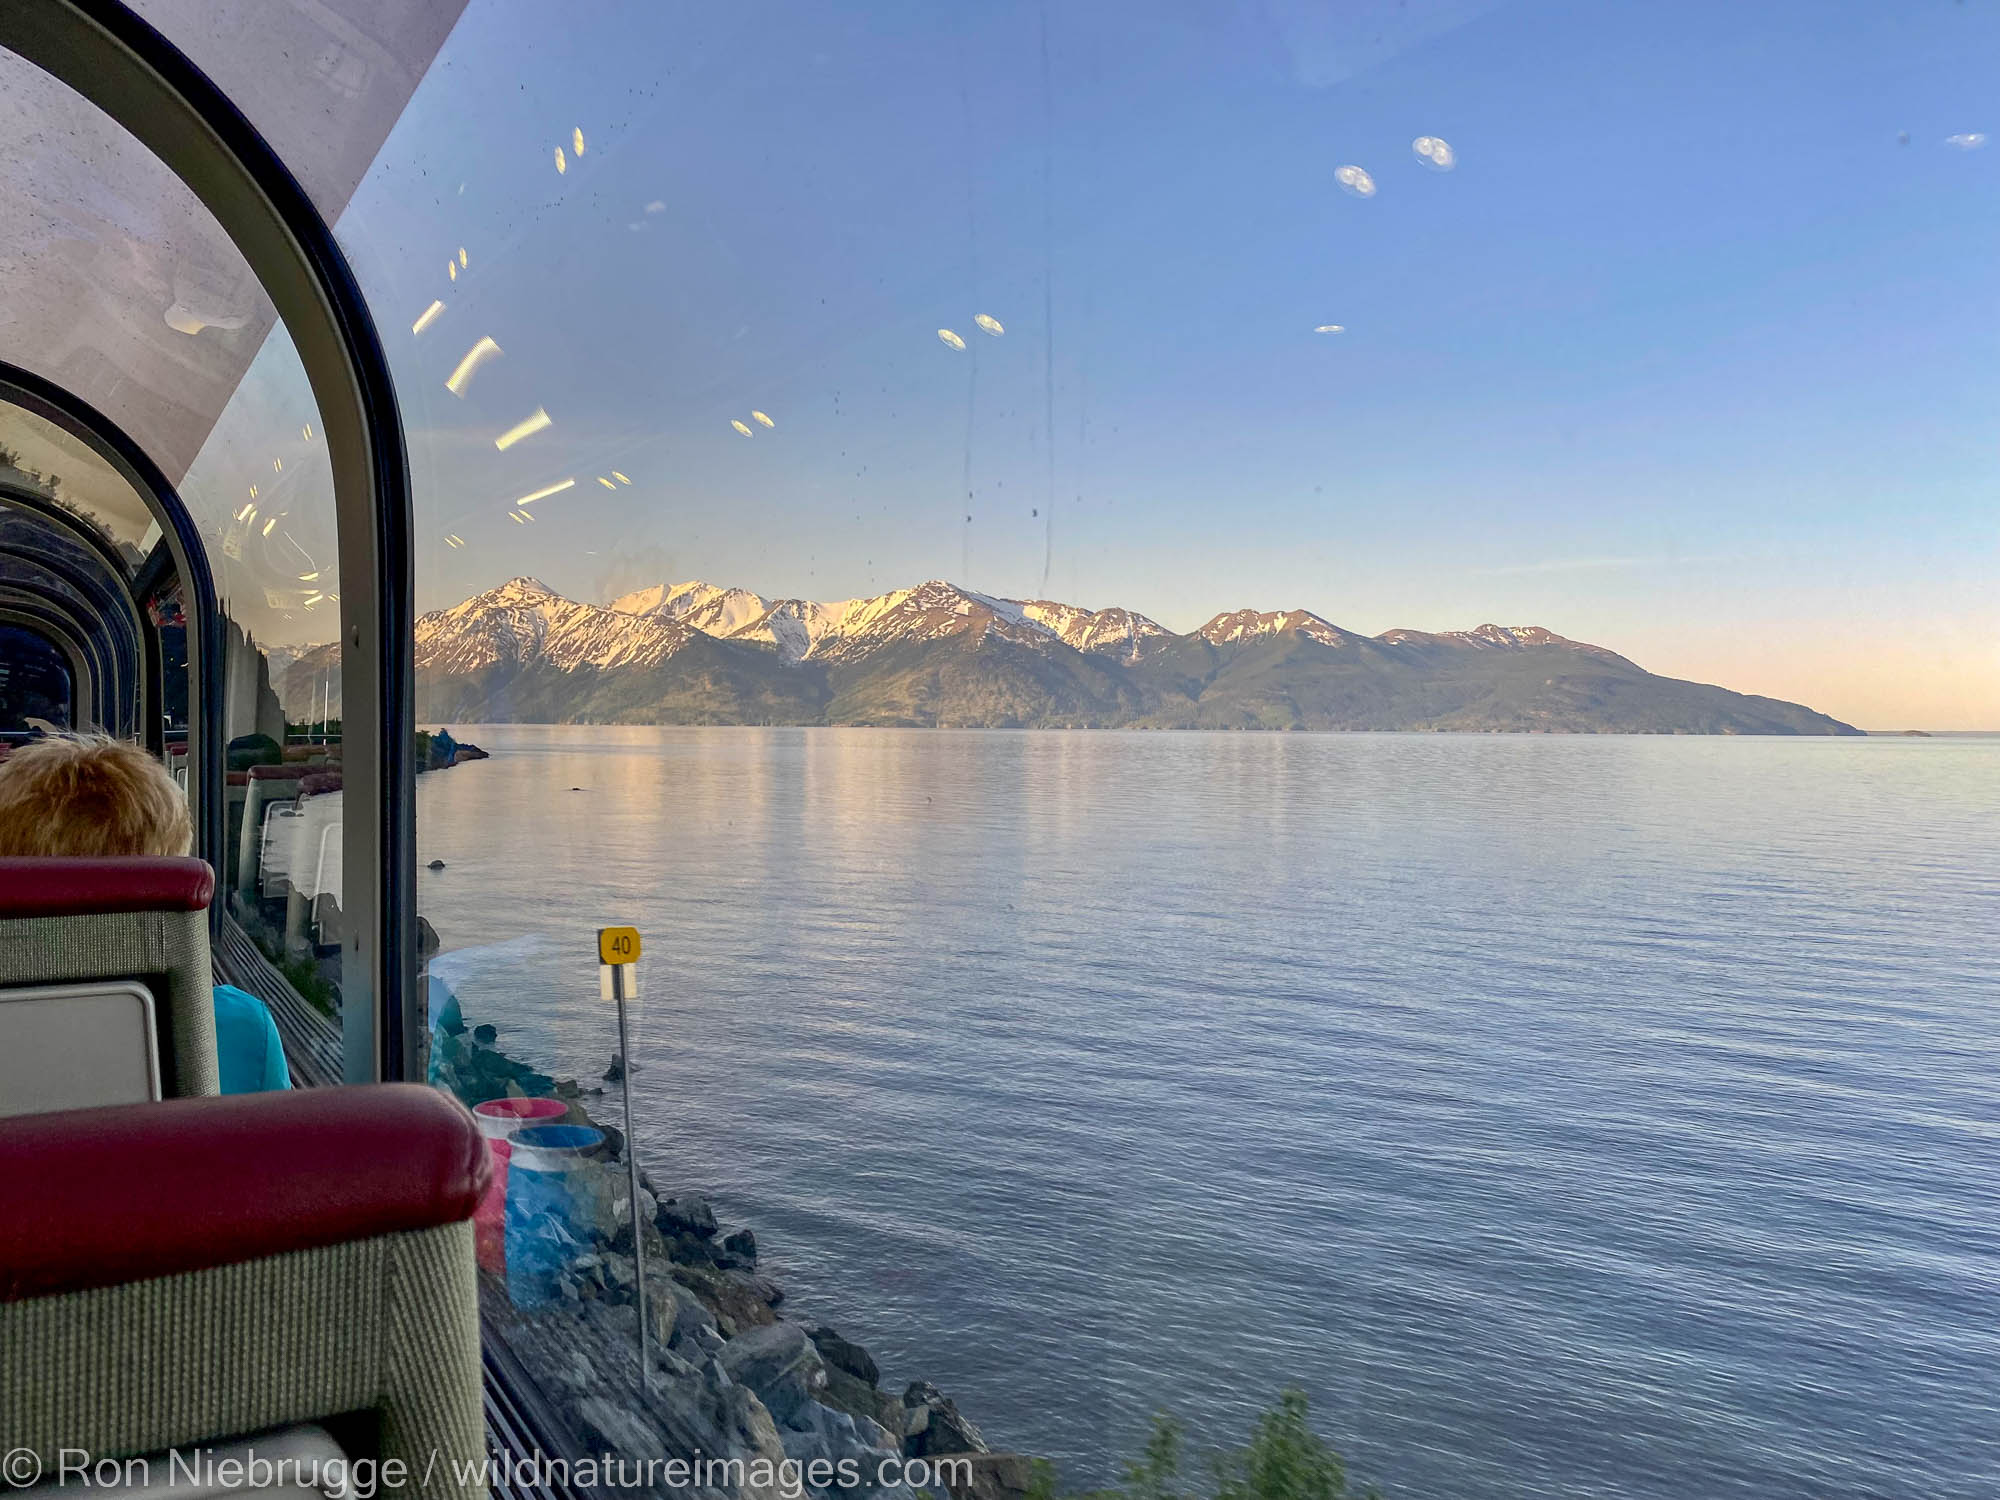 View of Turnagain Arm from the Gold Star Service dome car on the Alaska Railroad.  Iphone.